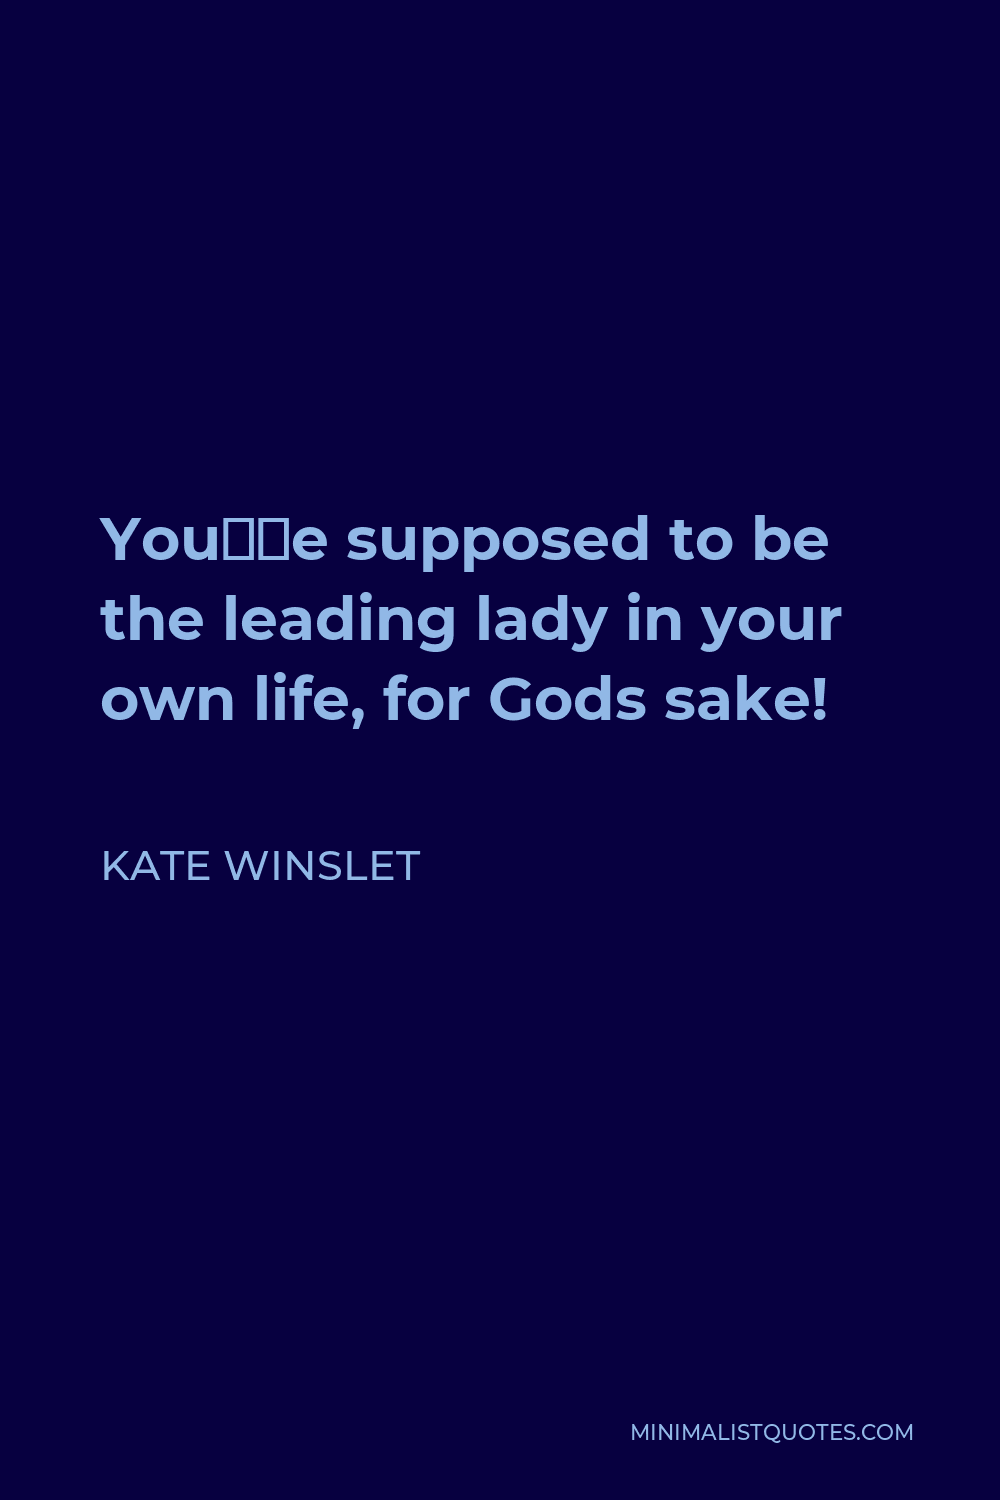 Kate Winslet Quote - You’re supposed to be the leading lady in your own life, for Gods sake!